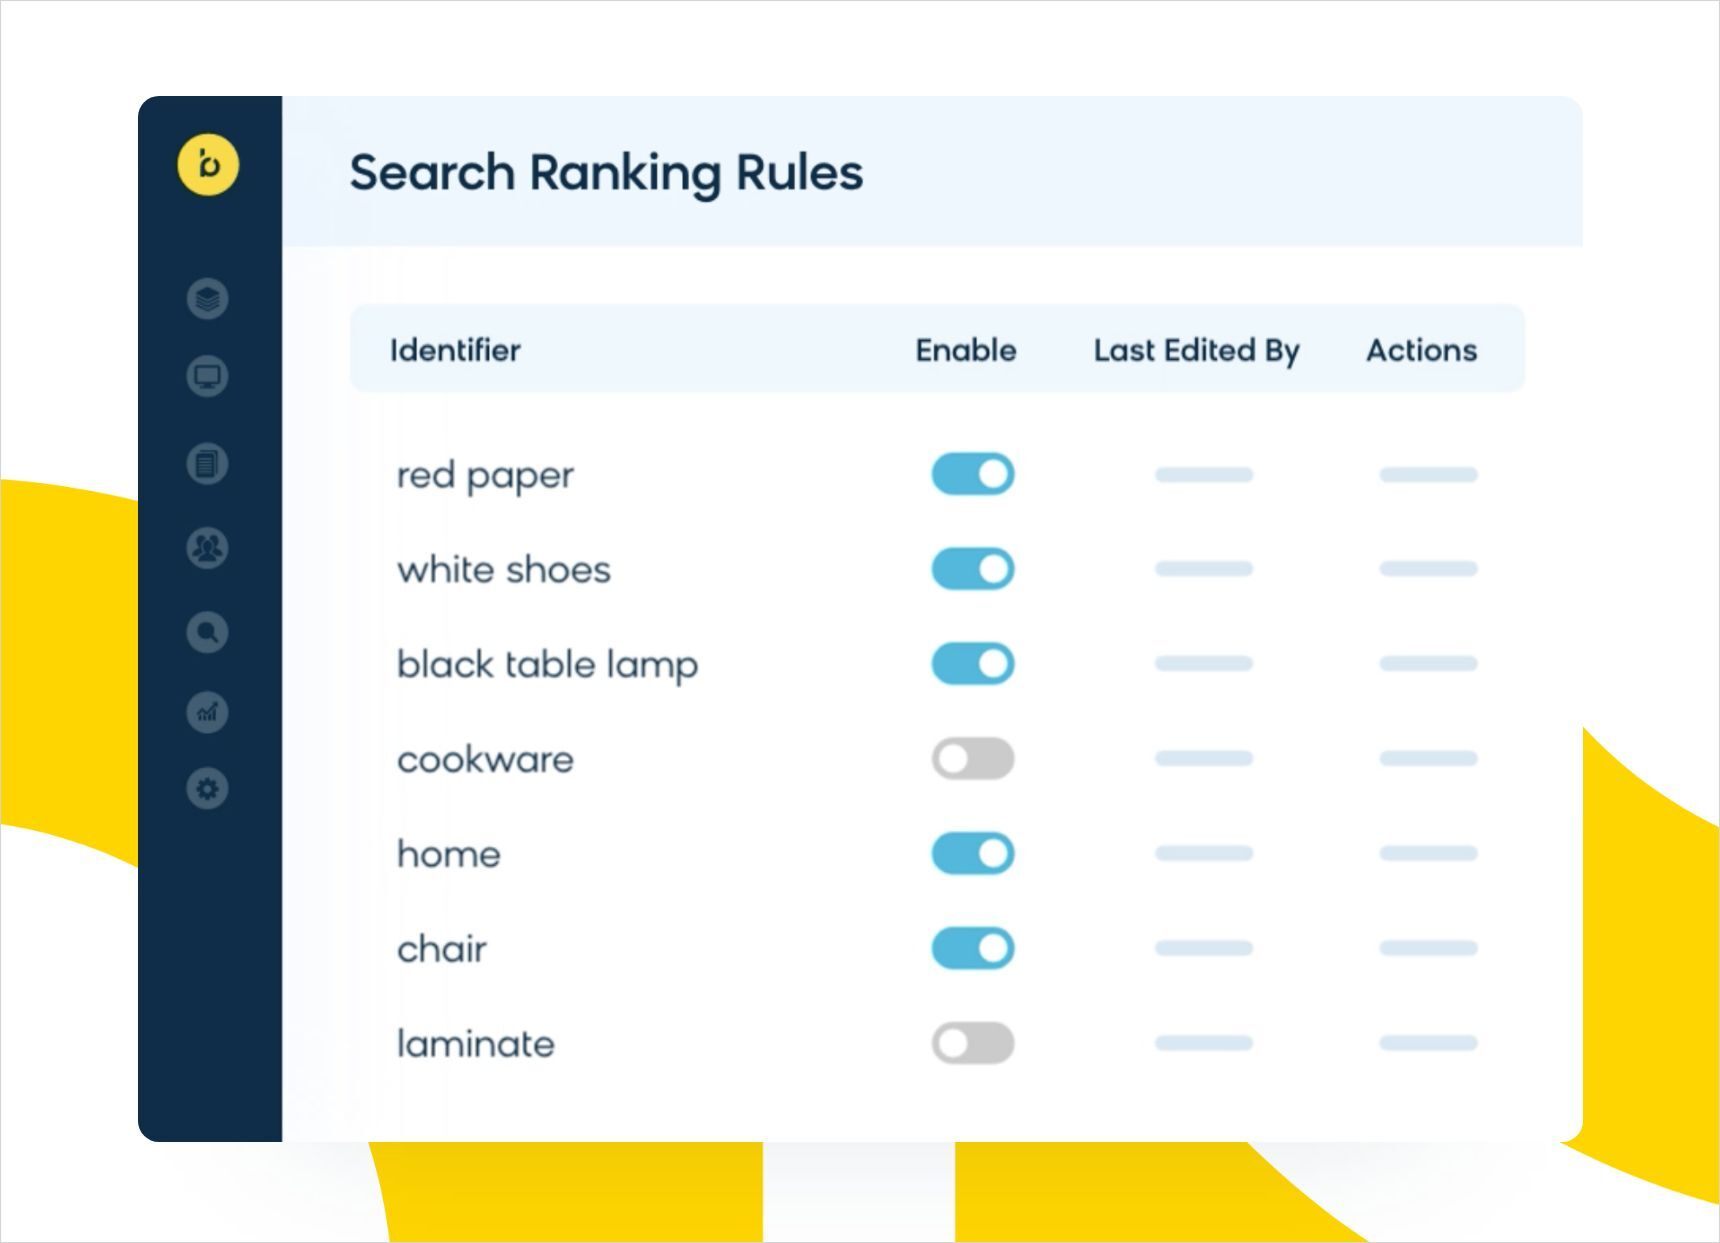 Image of ranking rules within Bloomreach Discovery